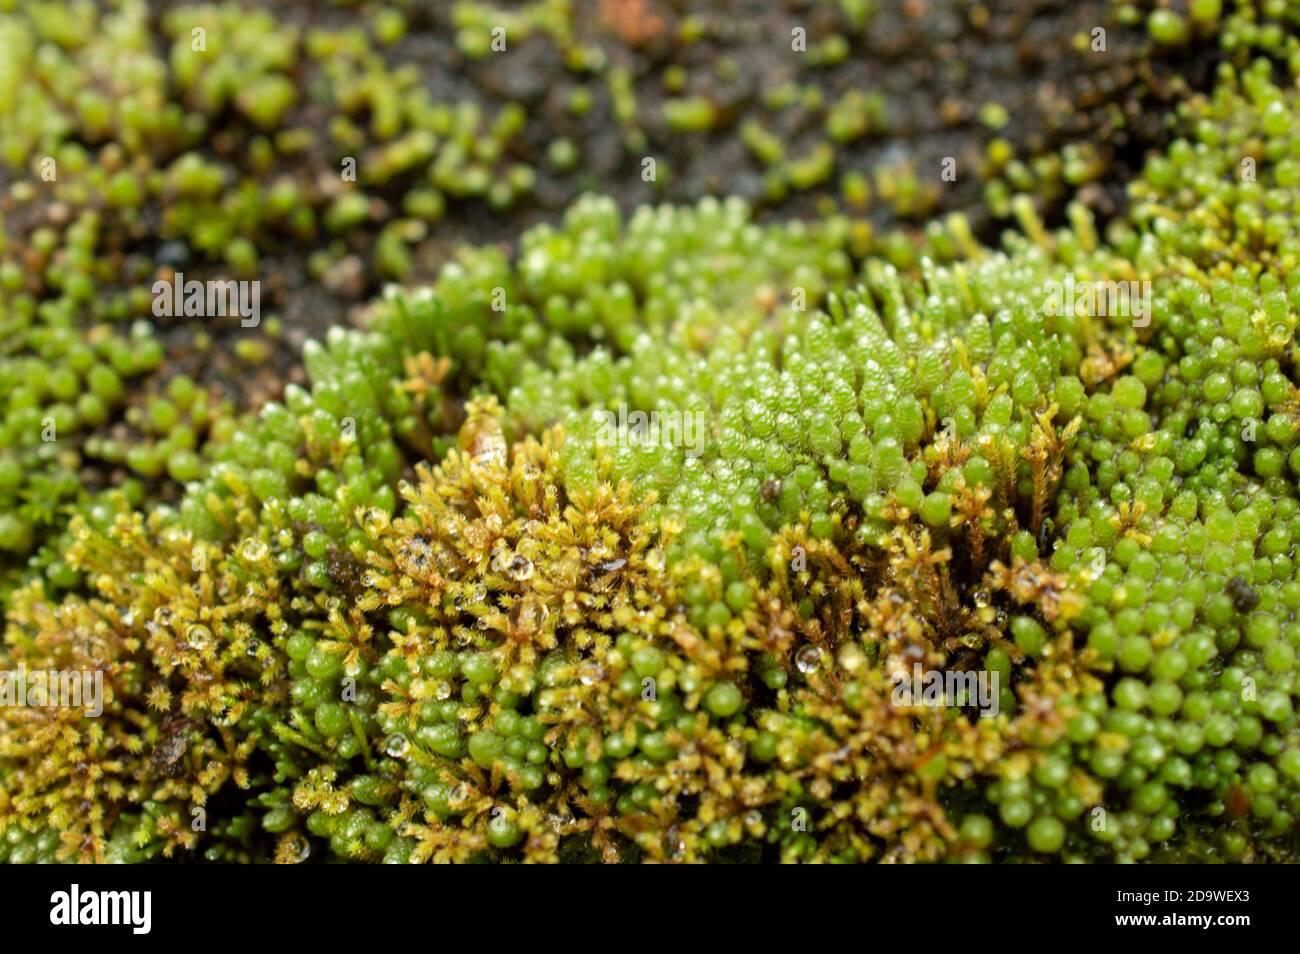 mosses-or-the-taxonomic-division-bryophyta-are-small-non-vascular-flowerless-plants-that-typically-form-dense-green-clumps-or-mats-2D9WEX3.jpg